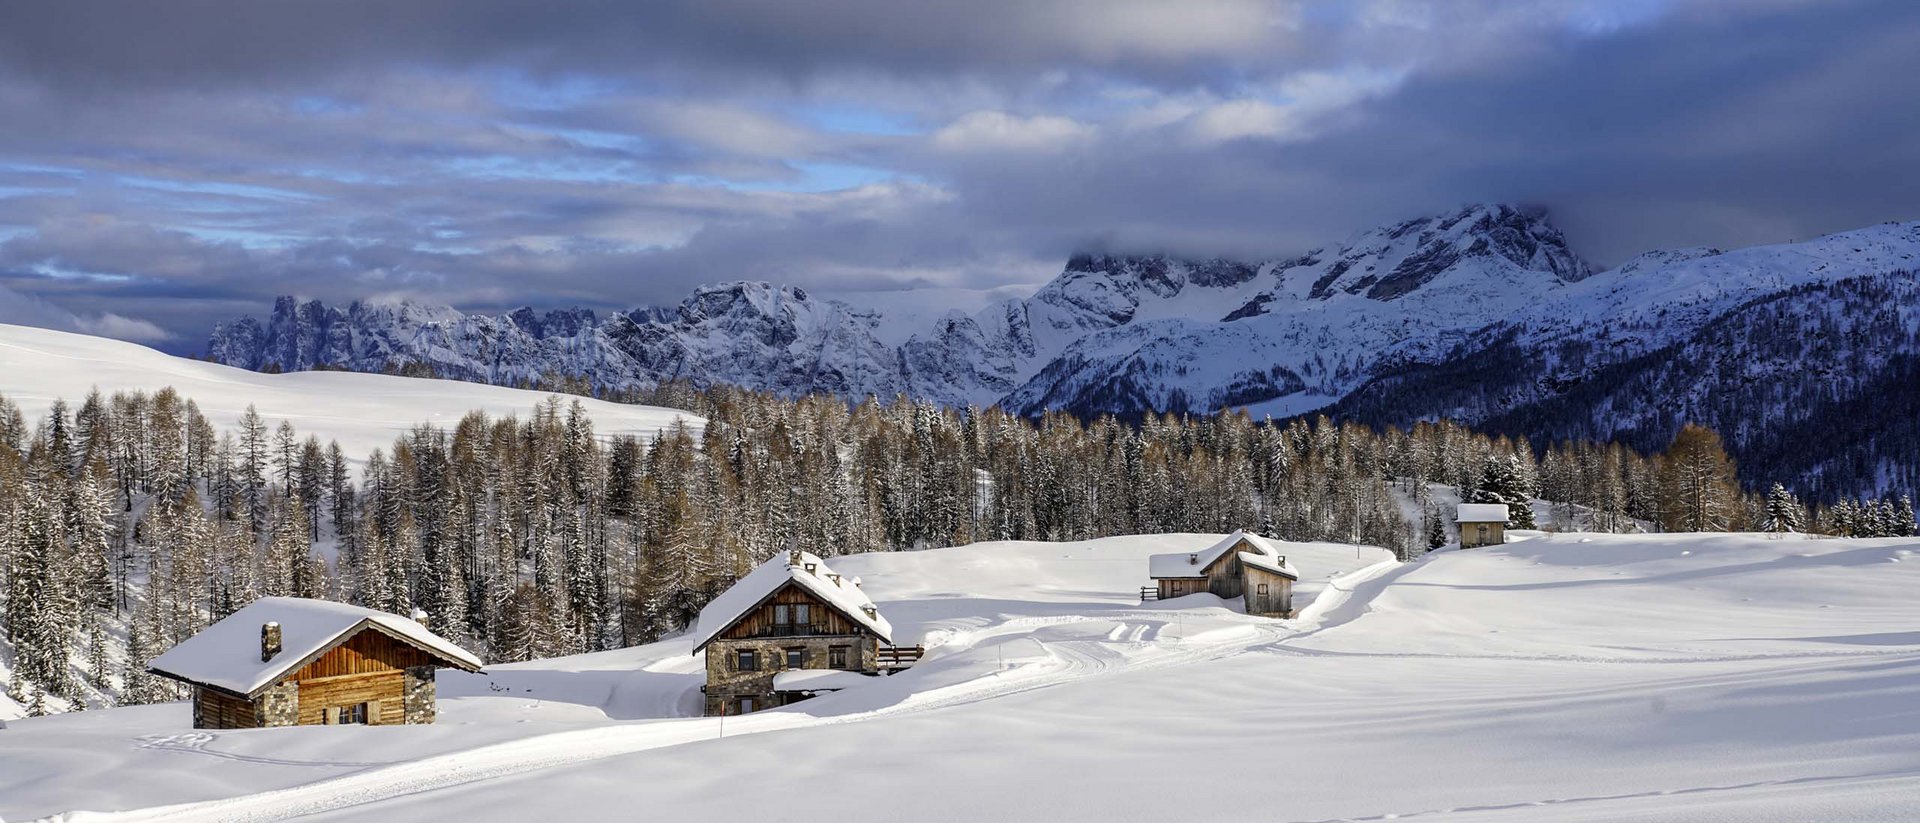 Moena: a cross-country skiing paradise